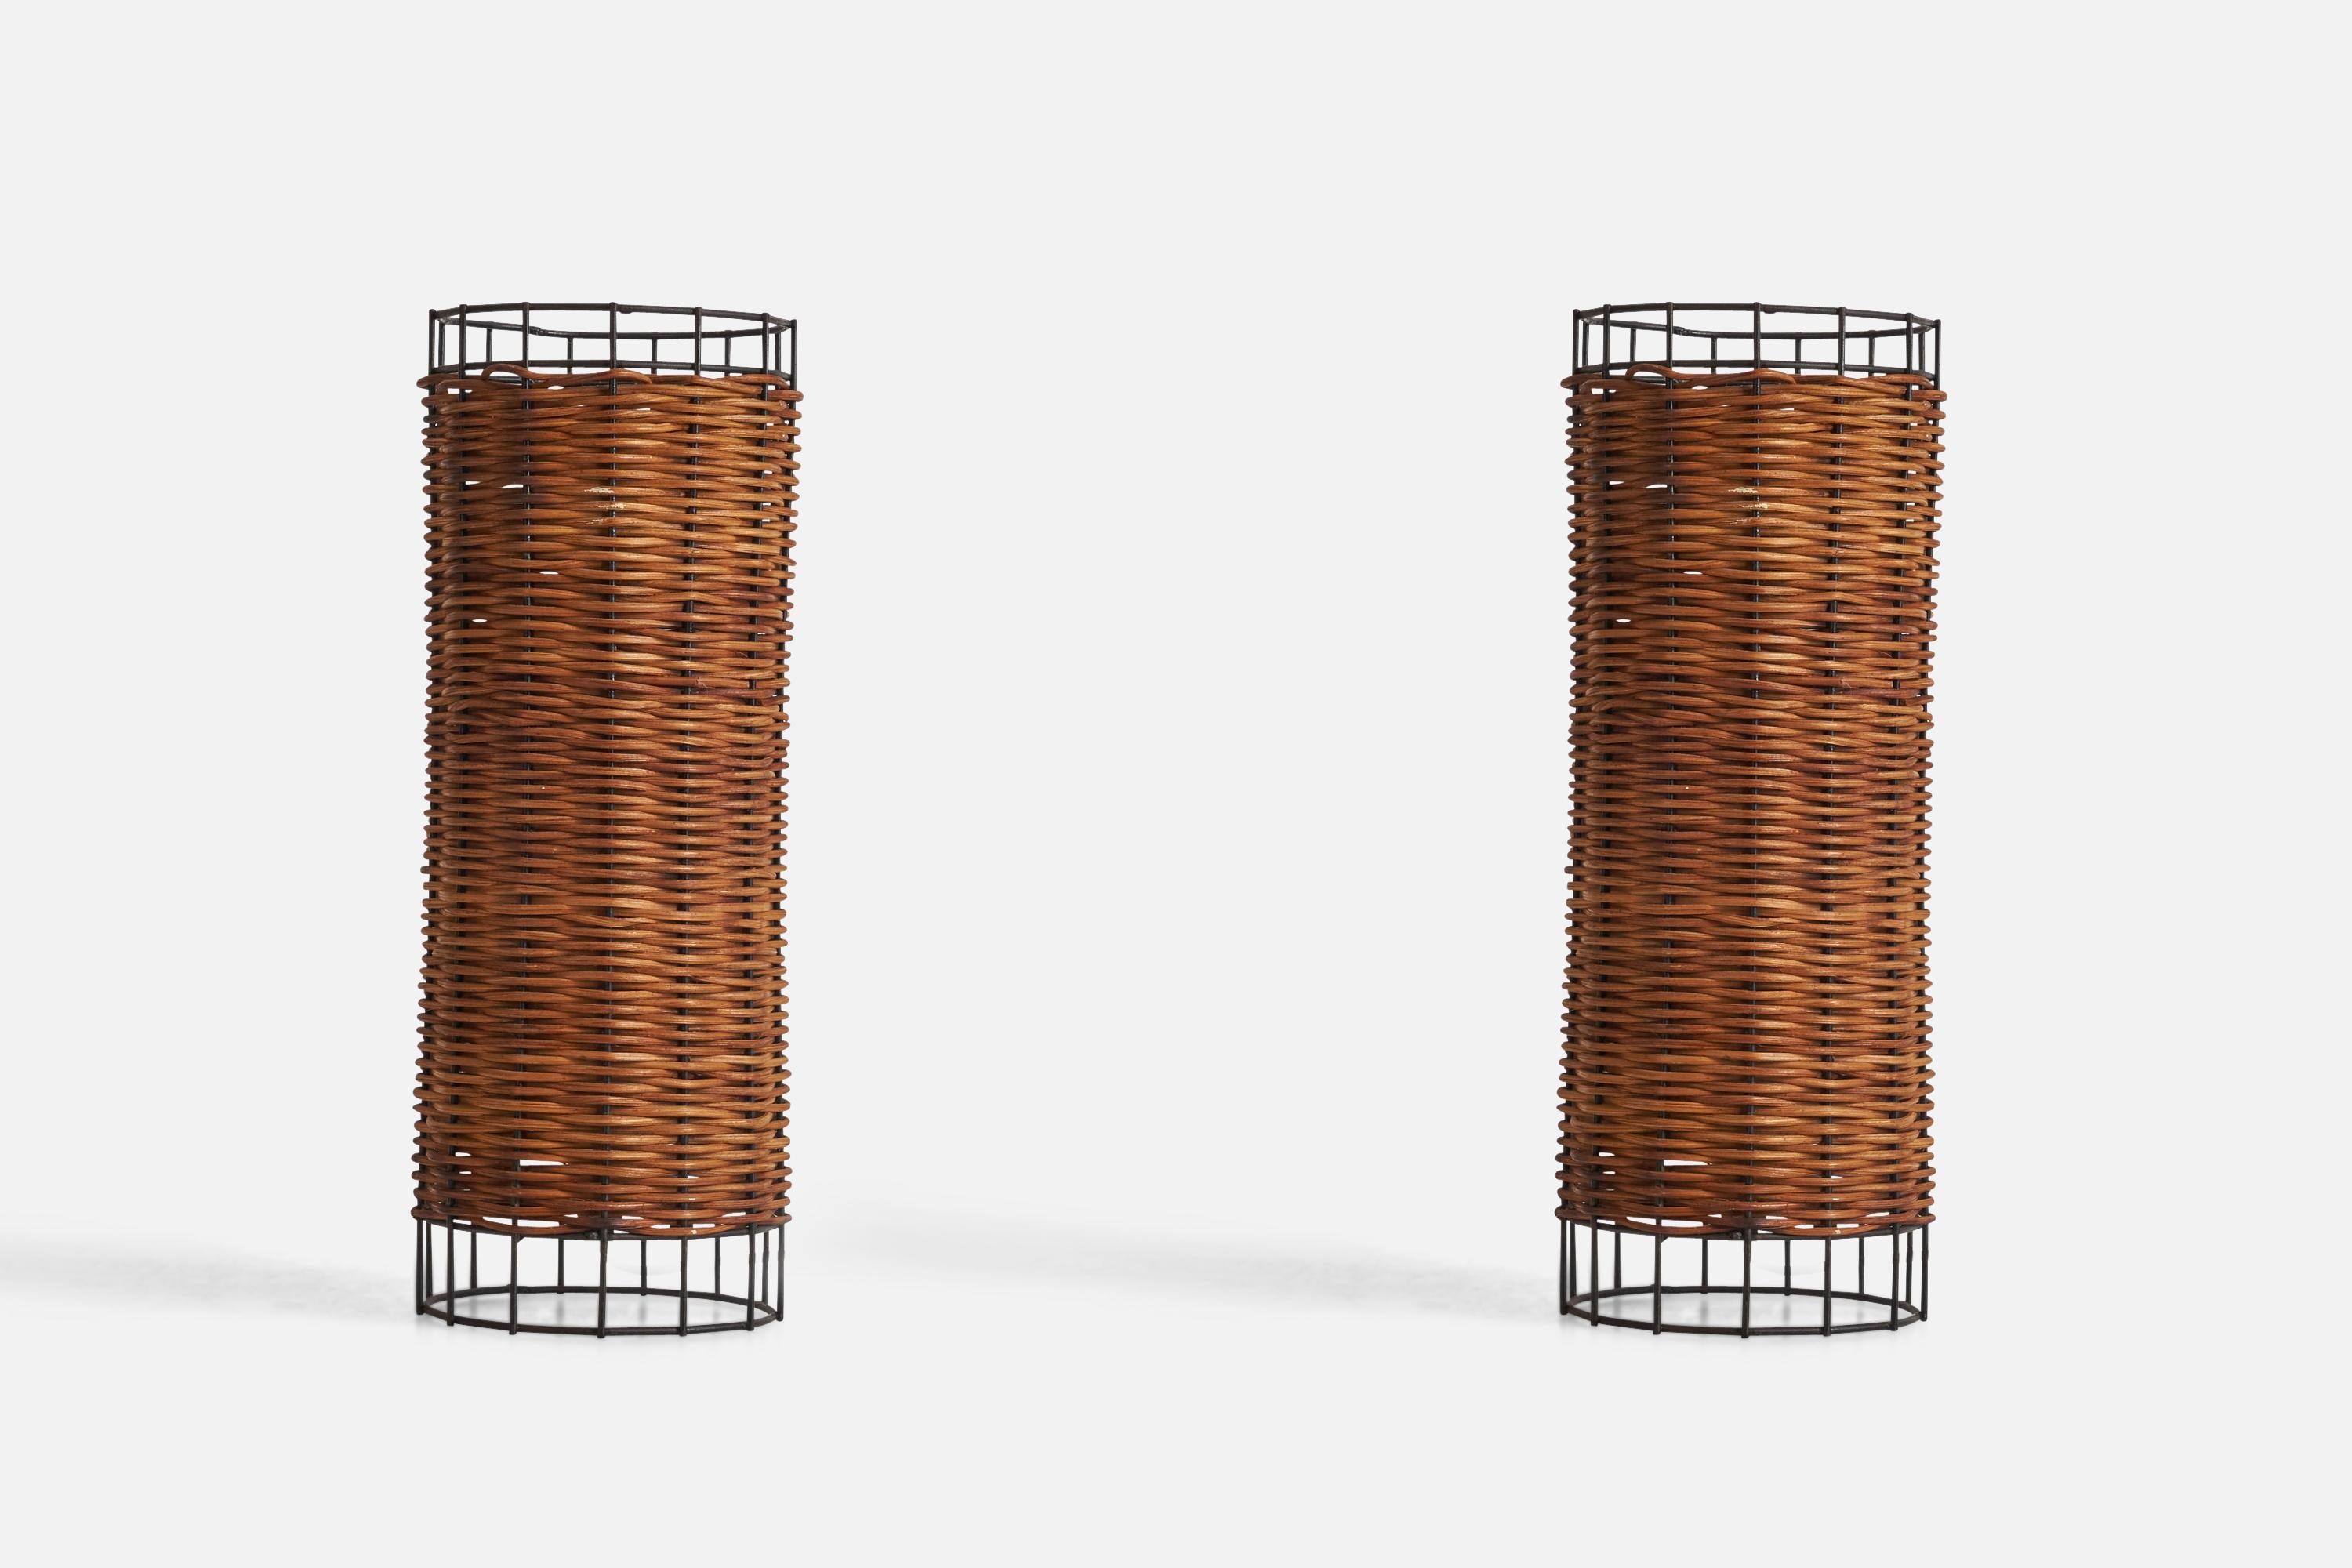 A pair of lacquered metal and rattan table lamps designed and produced by an American Designer, USA, 1950s.

Sockets take standard E-26 medium base bulbs.

There is no maximum wattage stated on the fixtures.